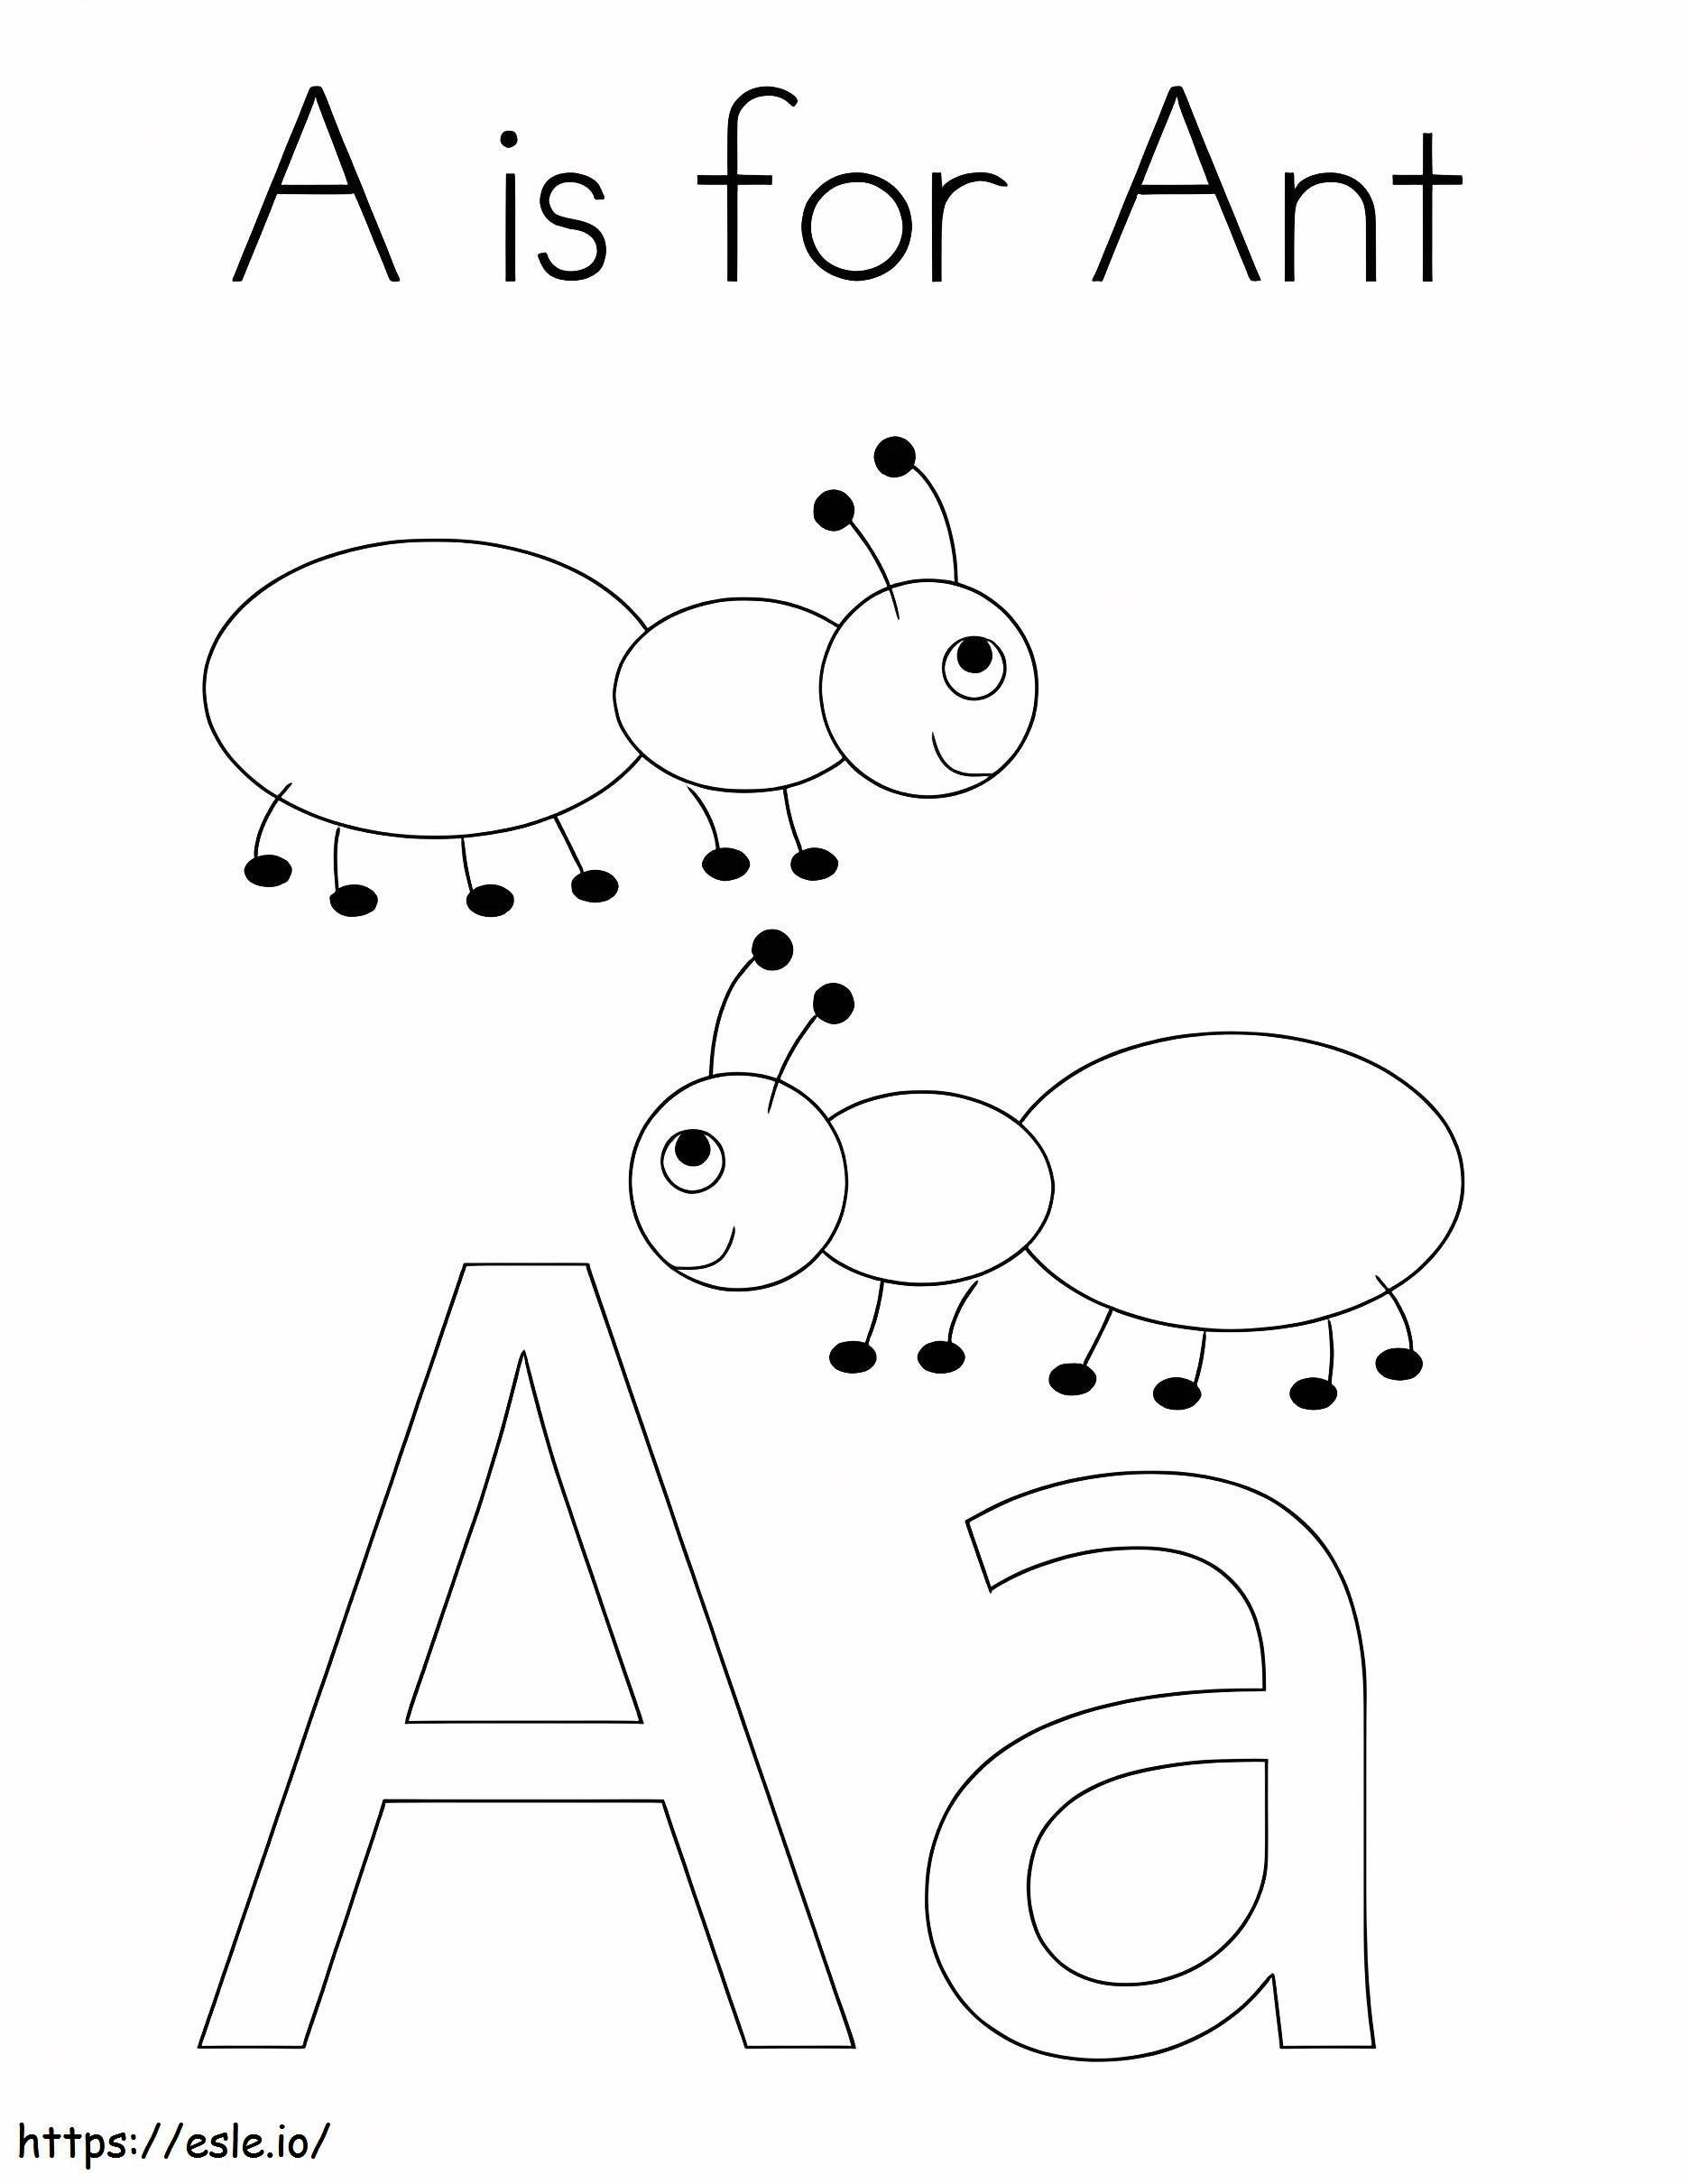 A Is For Ant coloring page